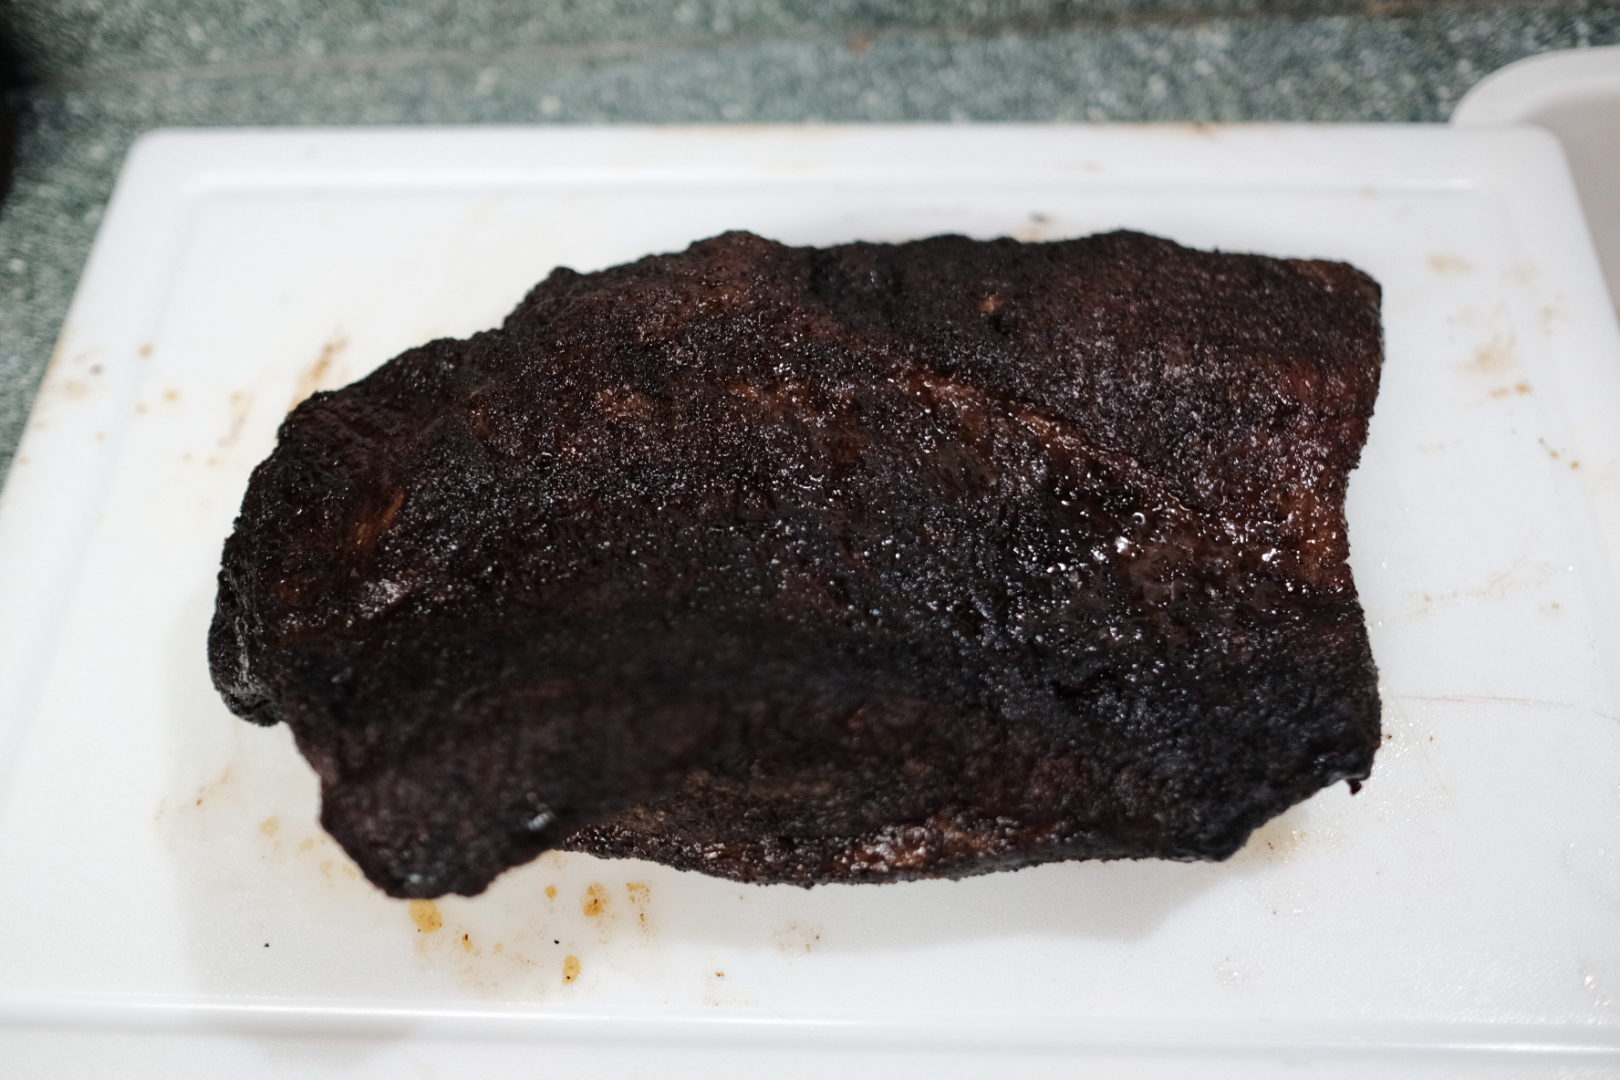 A fully cooked brisket sits on a cutting board, ready to be cut.